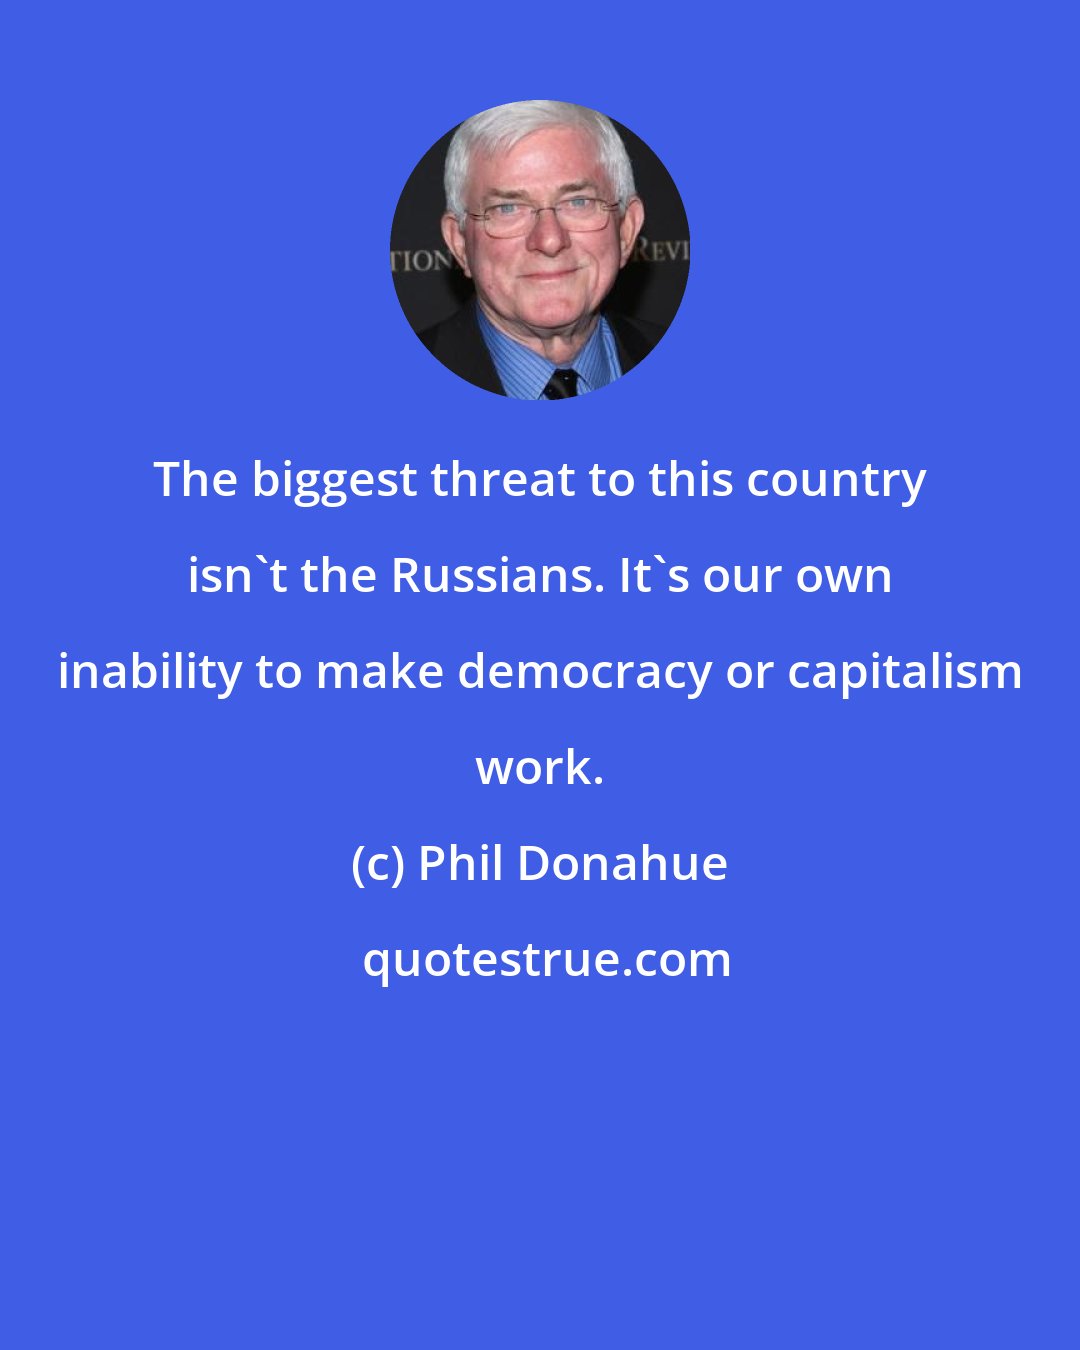 Phil Donahue: The biggest threat to this country isn't the Russians. It's our own inability to make democracy or capitalism work.